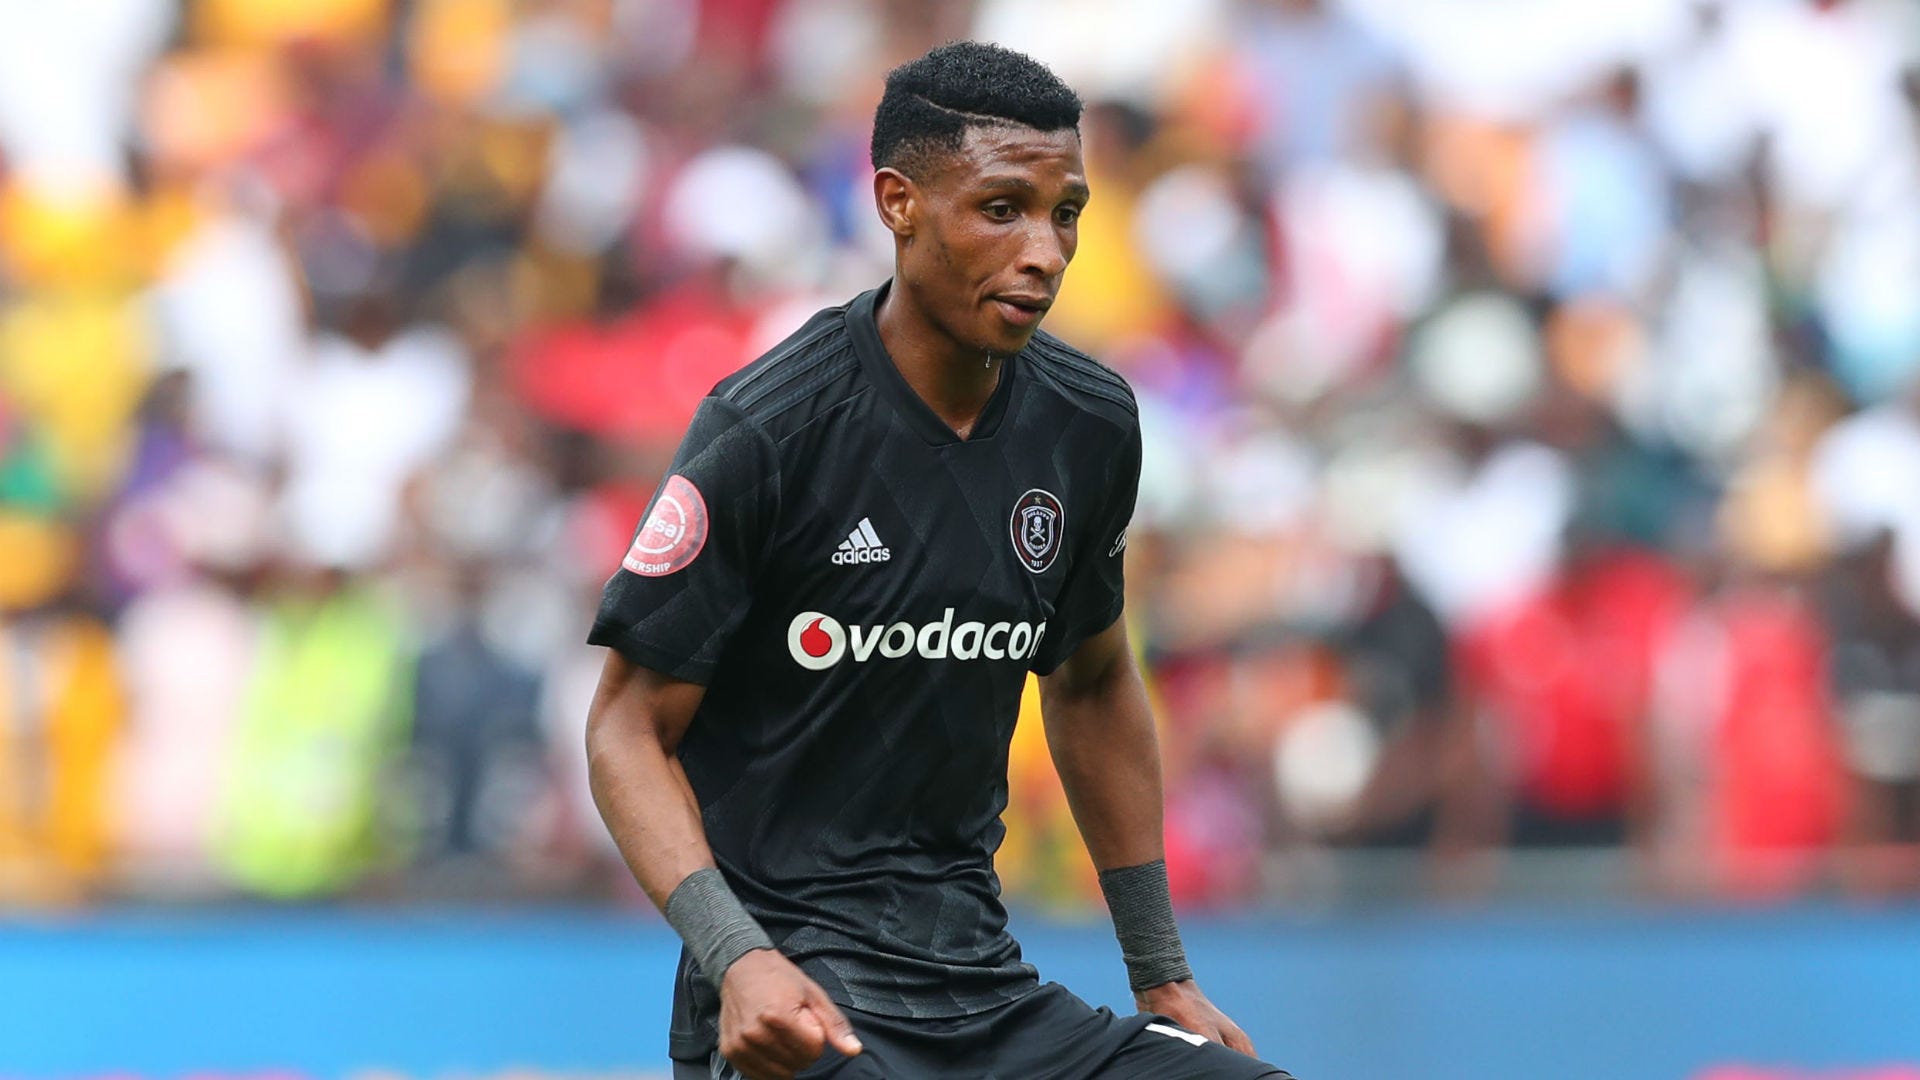 Pirates player jersey accolades